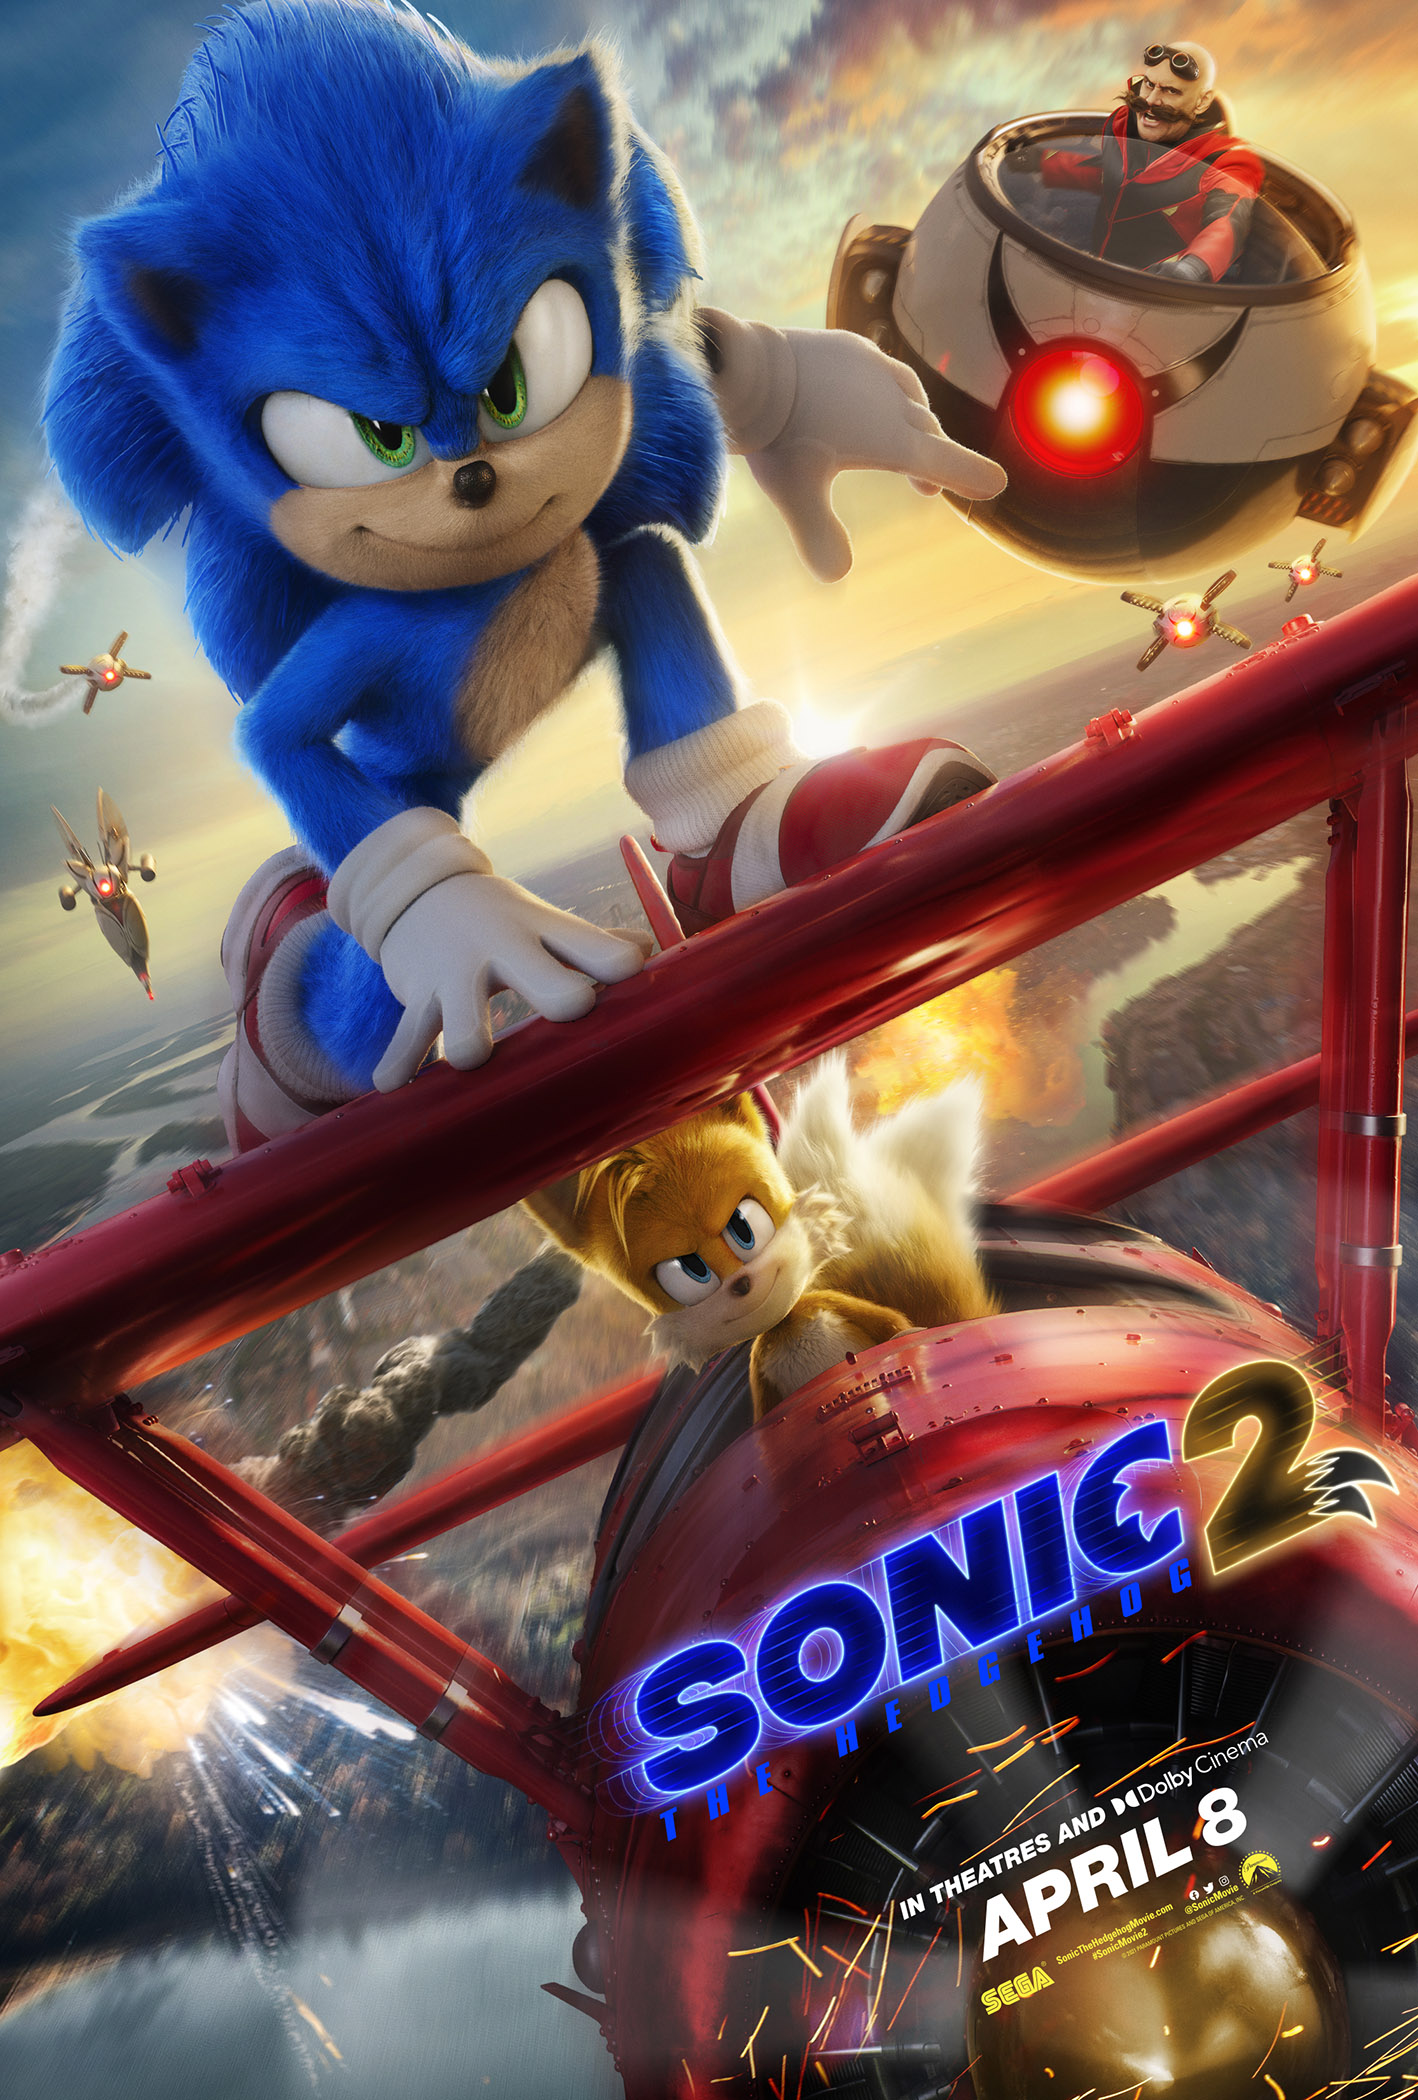 Sonic The Hedgehog 2 poster airplane